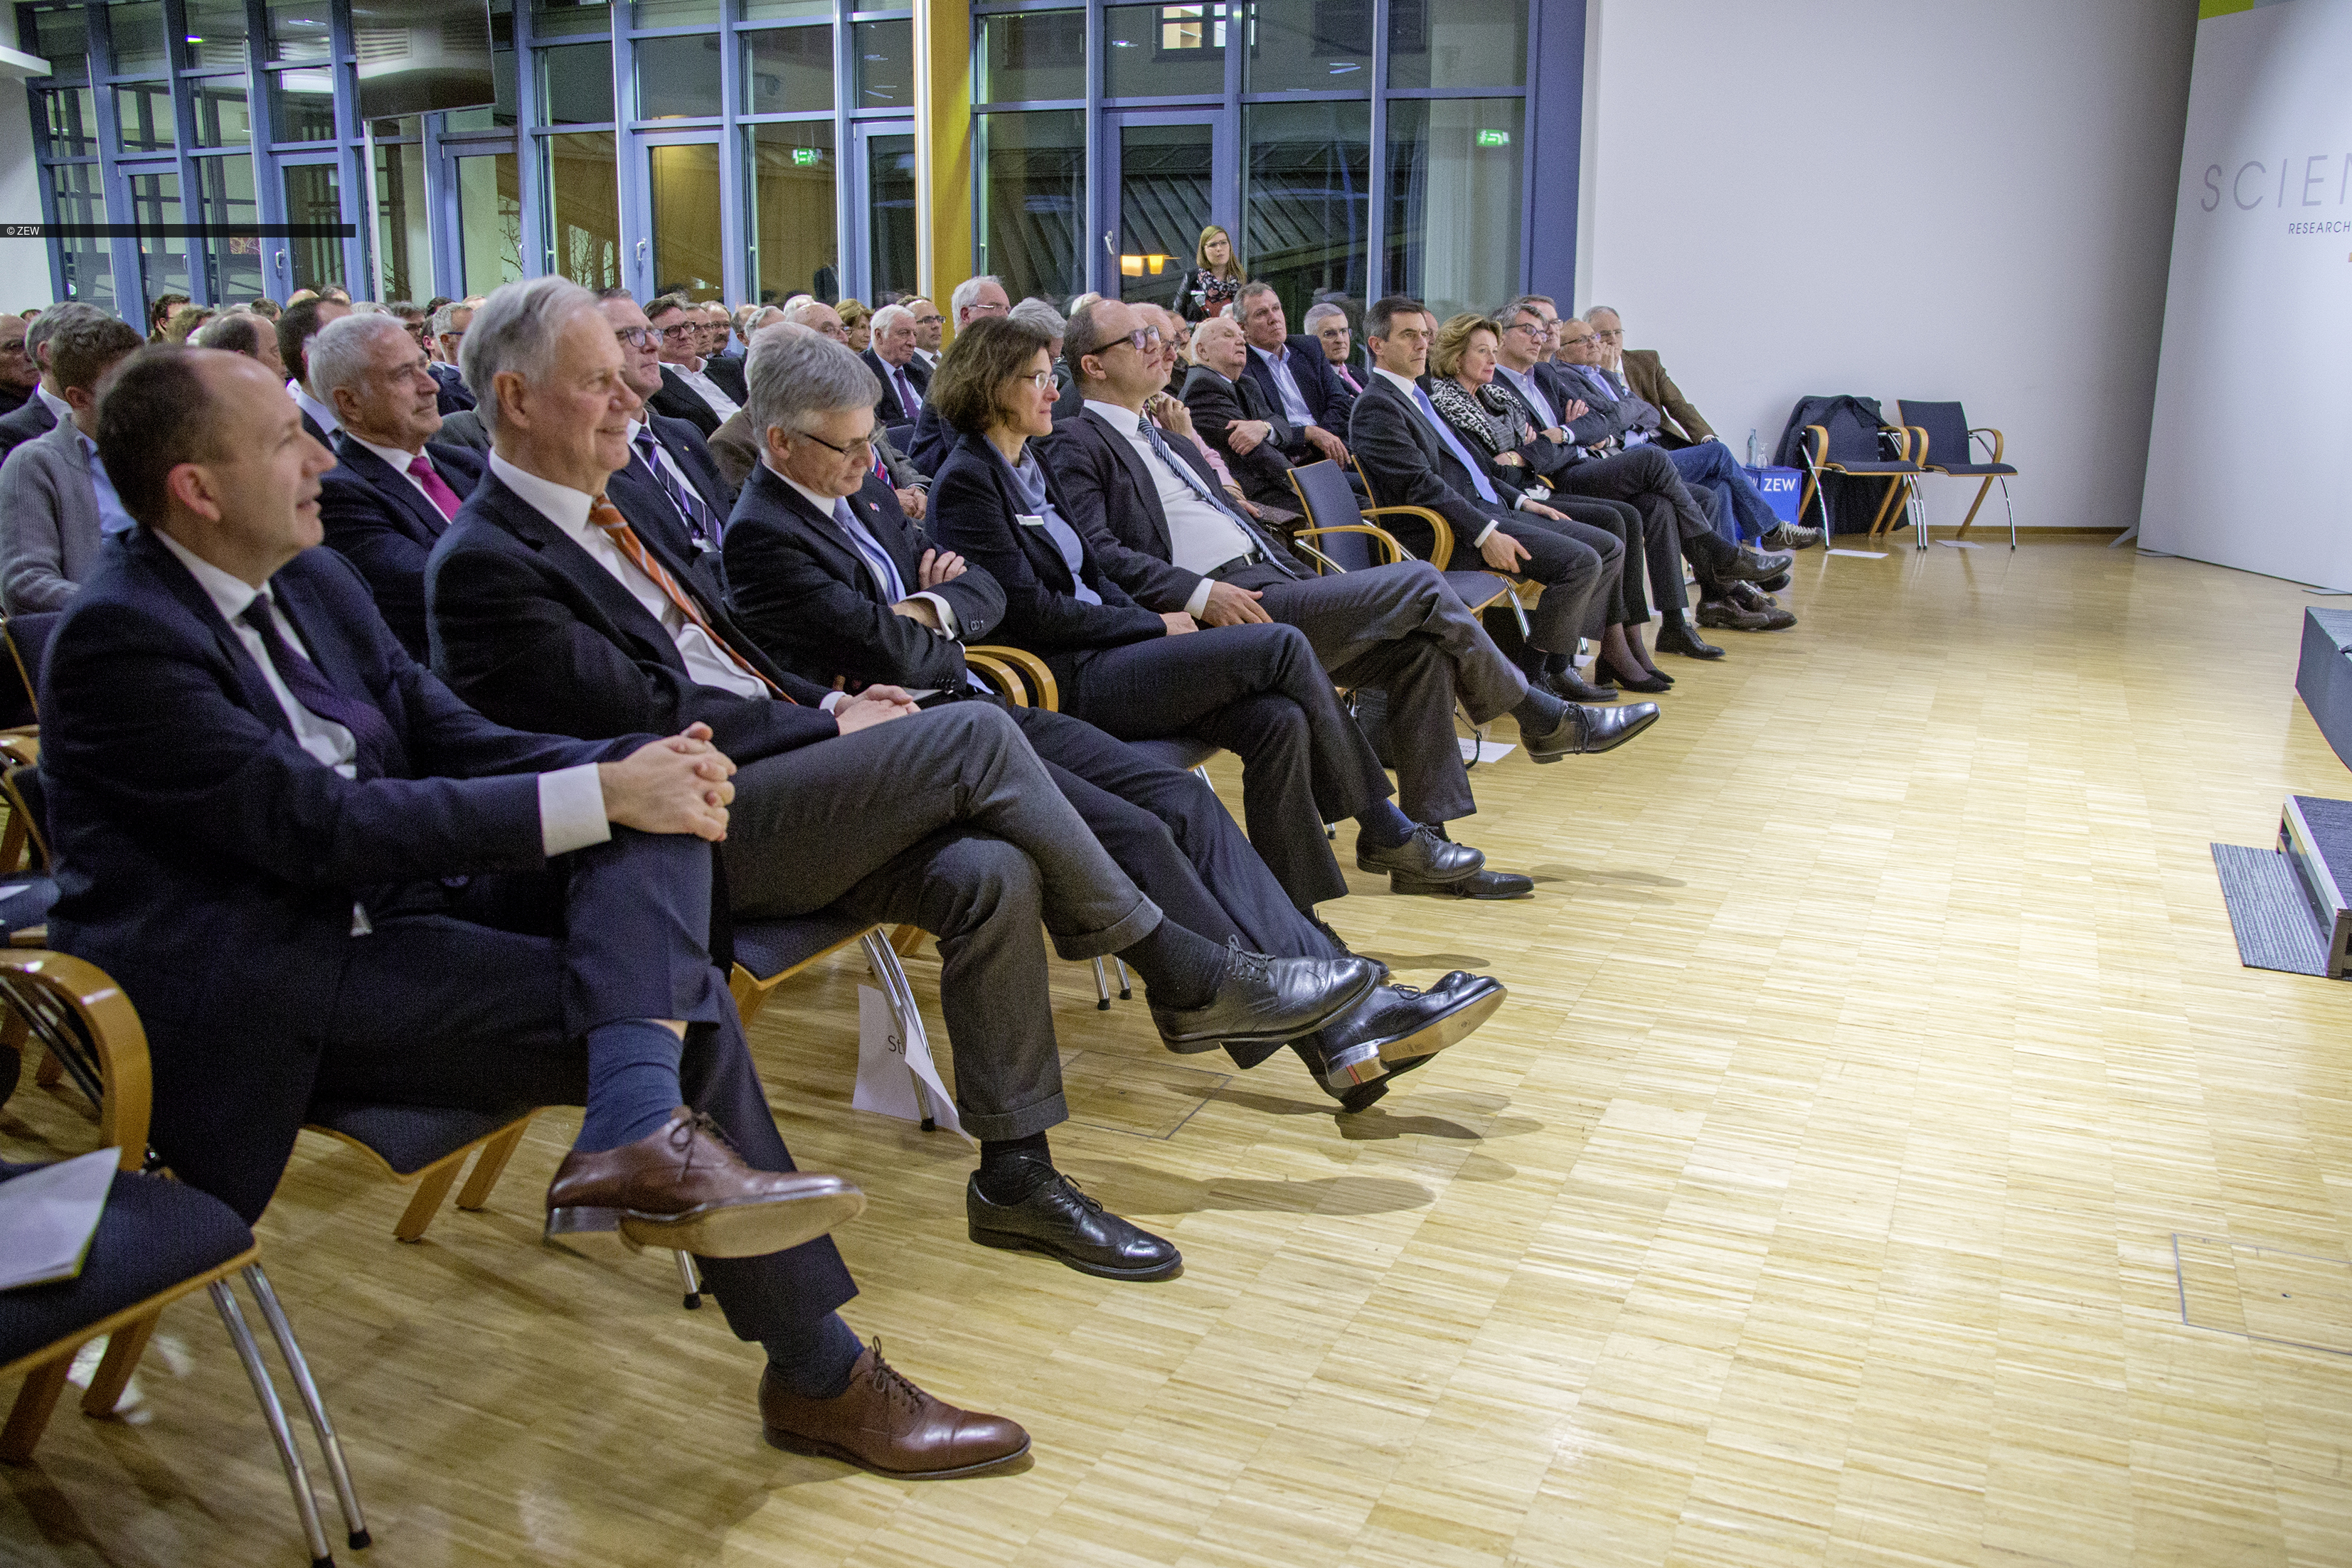 Event at ZEW focused on Germany’s Energy Transition